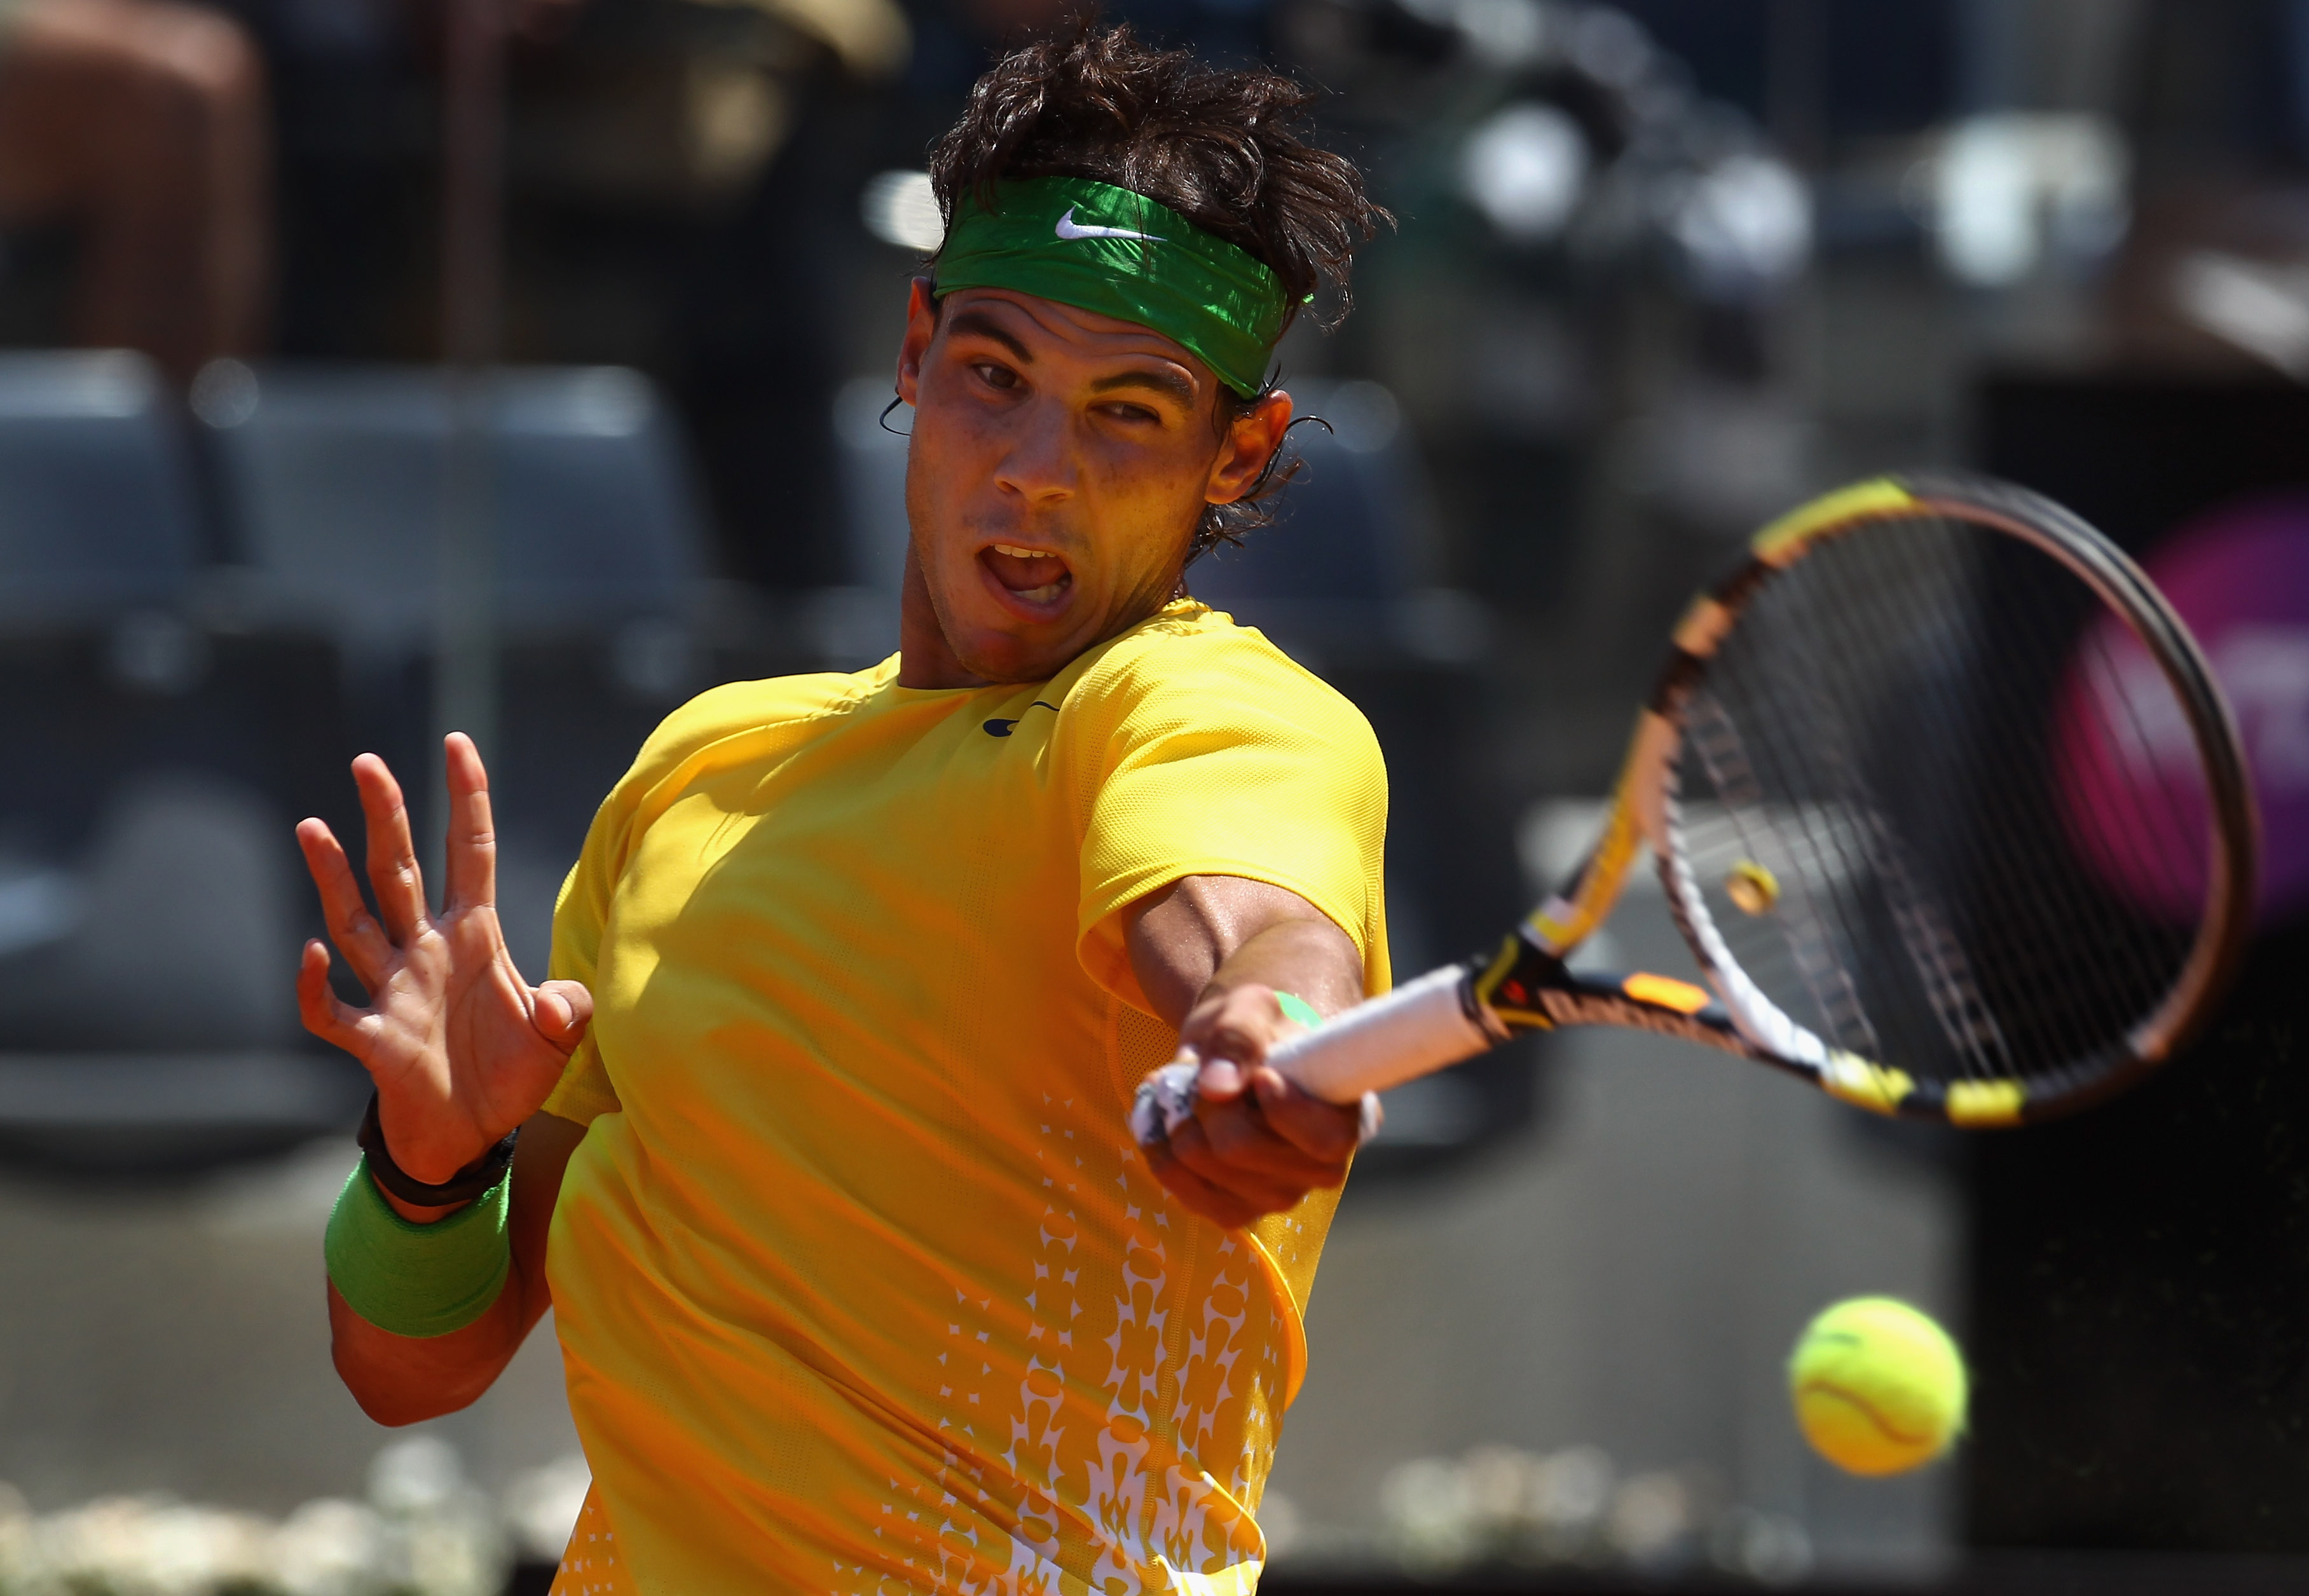 ROME, ITALY - MAY 12:  Rafael Nadal of Spain hits a forehand return during his third round match against Feliciano Lopez of Spain during day five of the Internazionali BNL d'Italia at the Foro Italico Tennis Centre on May 12, 2011 in Rome, Italy.  (Photo